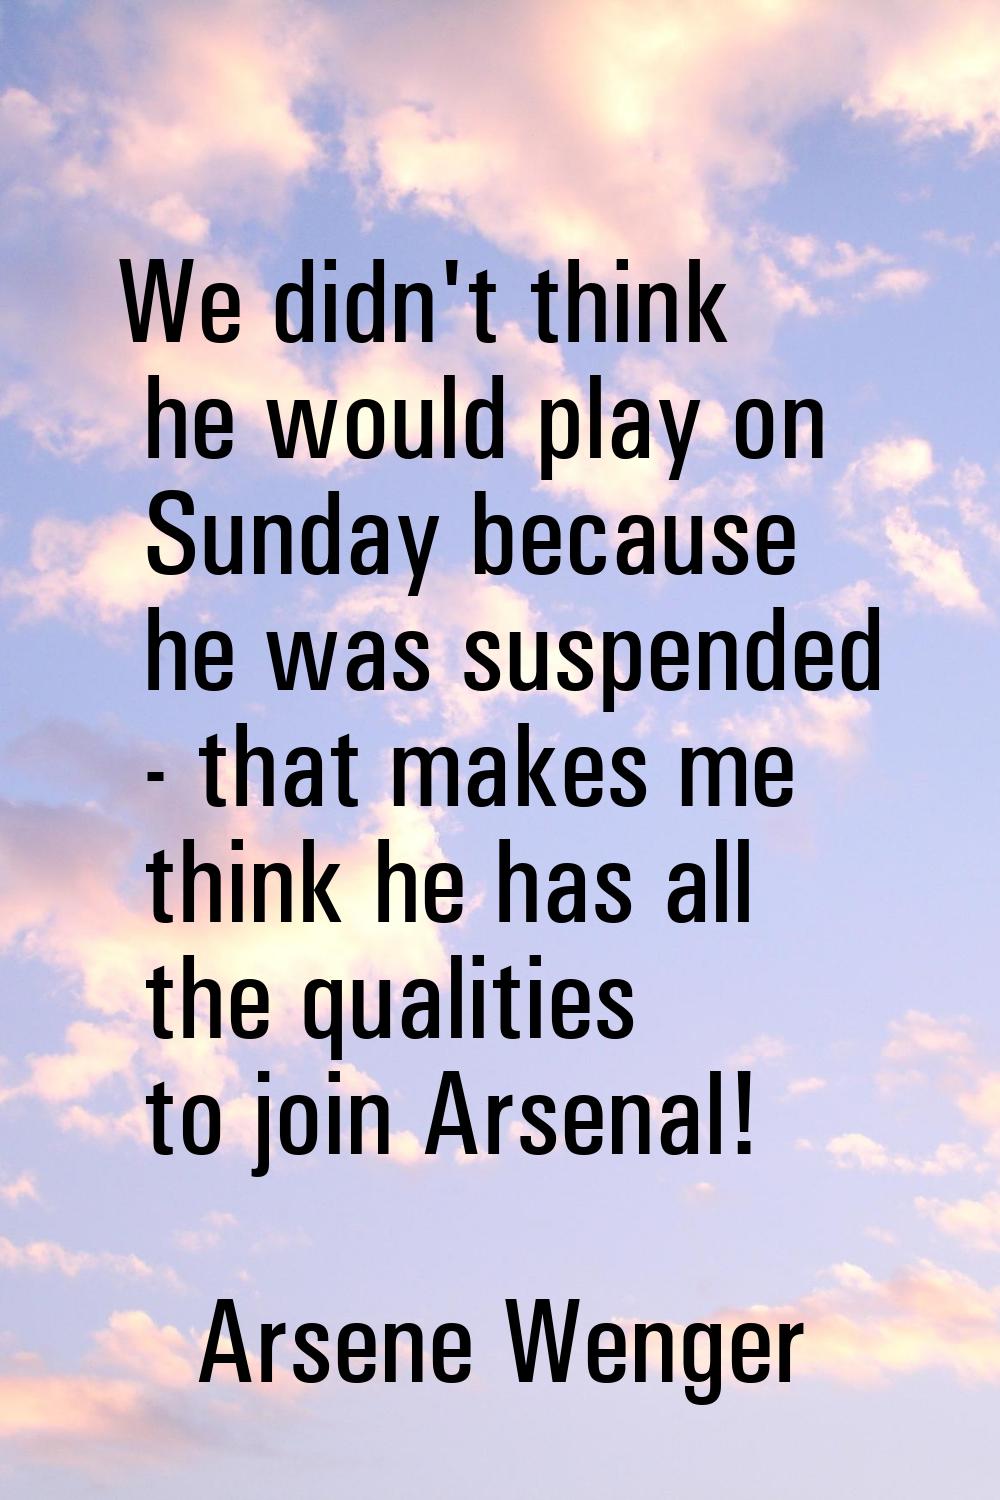 We didn't think he would play on Sunday because he was suspended - that makes me think he has all t